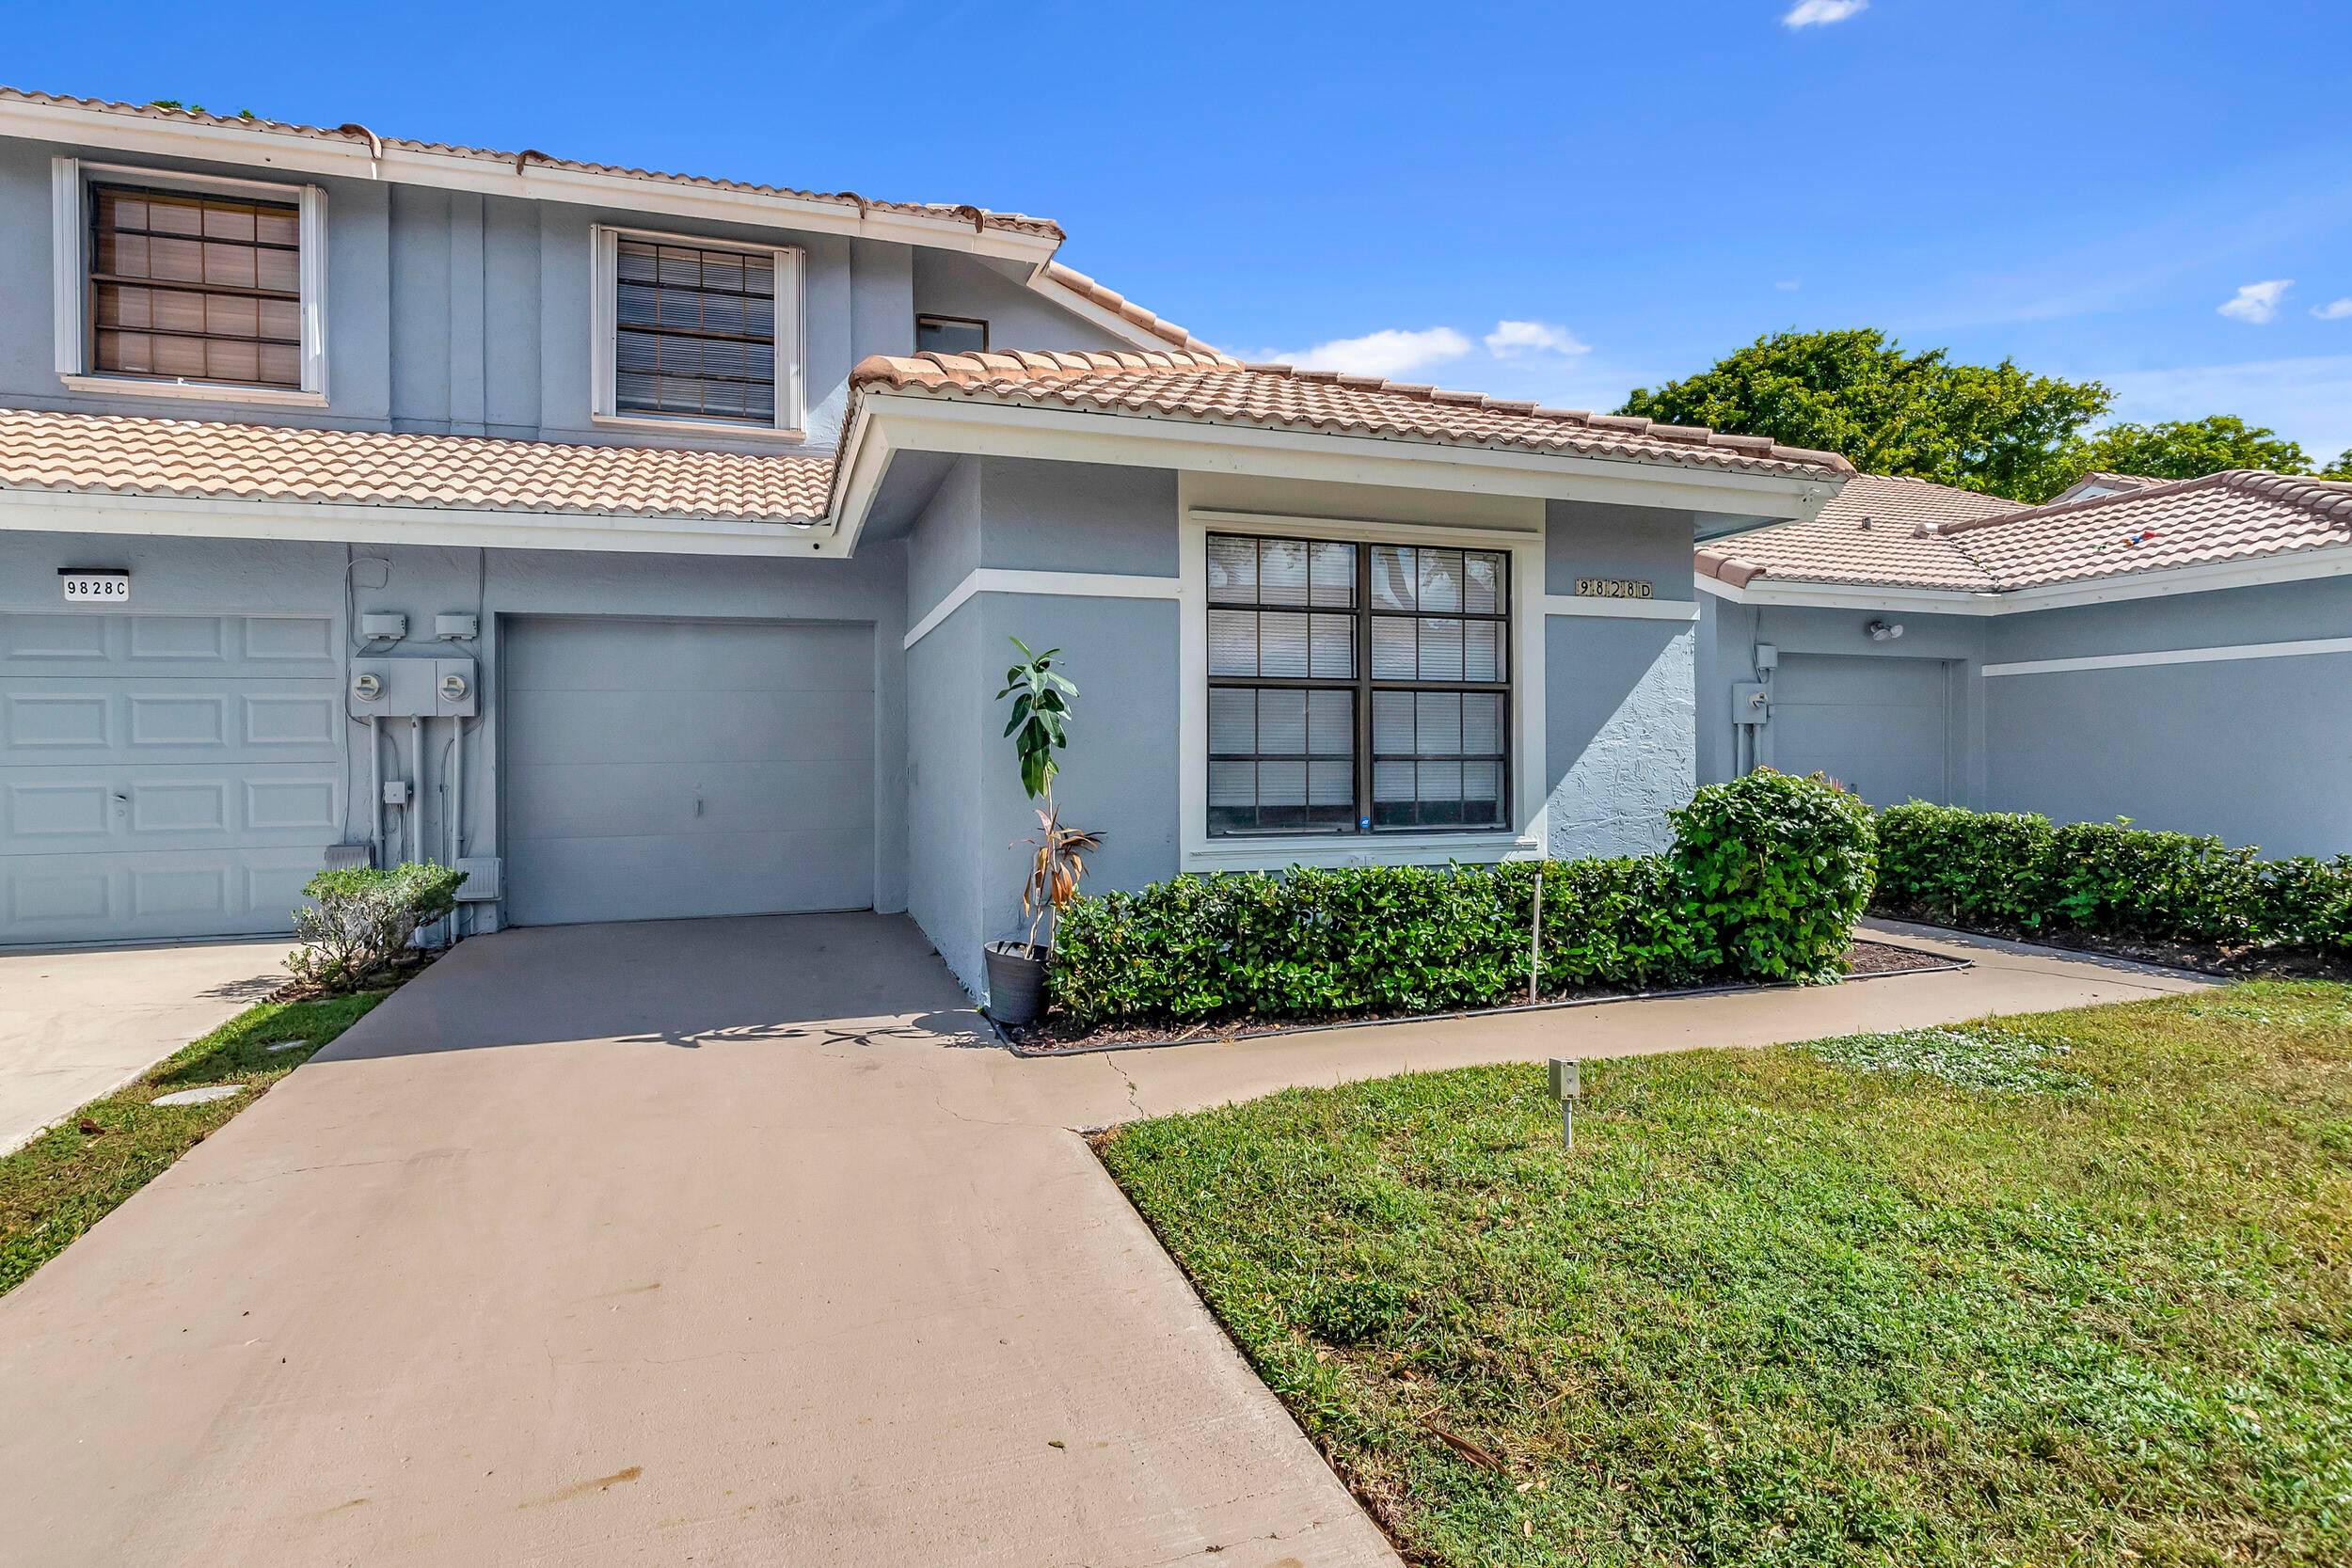 An incredible opportunity to own a beautiful townhome nestled on a quiet street in West Boynton Beach.